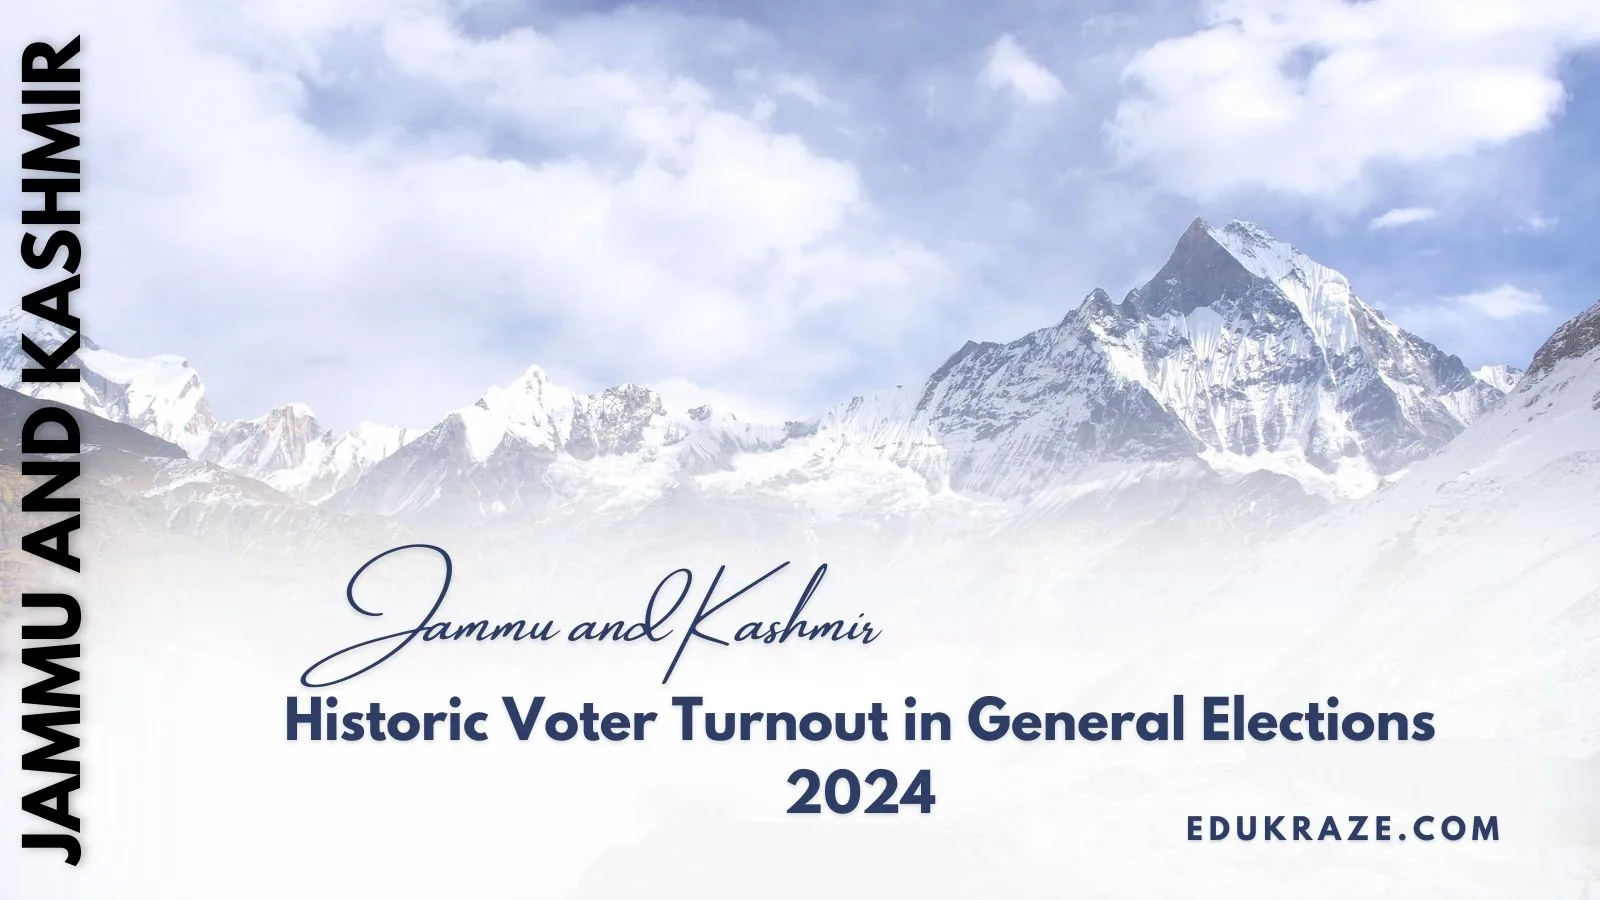 Jammu and Kashmir Achieves Historic Voter Turnout in General Elections 2024